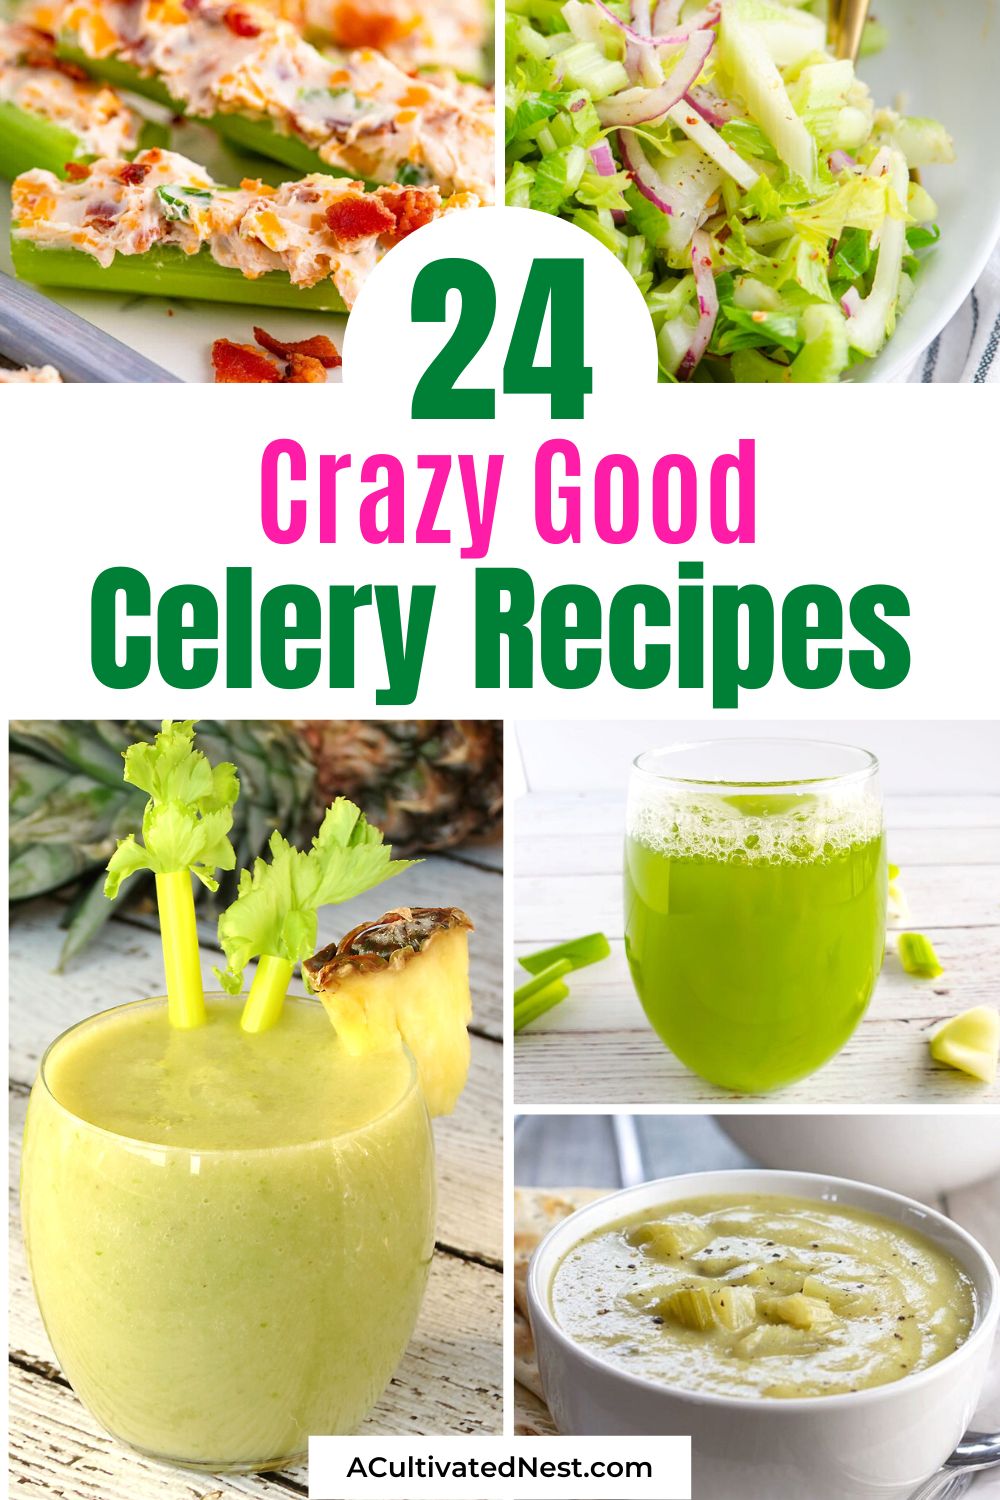 24 Crazy Good Celery Recipes- Celery can be used for more than just plain celery stick snacks. For some healthy, budget-friendly, and delicious ideas, check out these crazy good celery recipes! | #recipes #healthyEating #healthyRecipes #celeryRecipes #ACultivatedNest